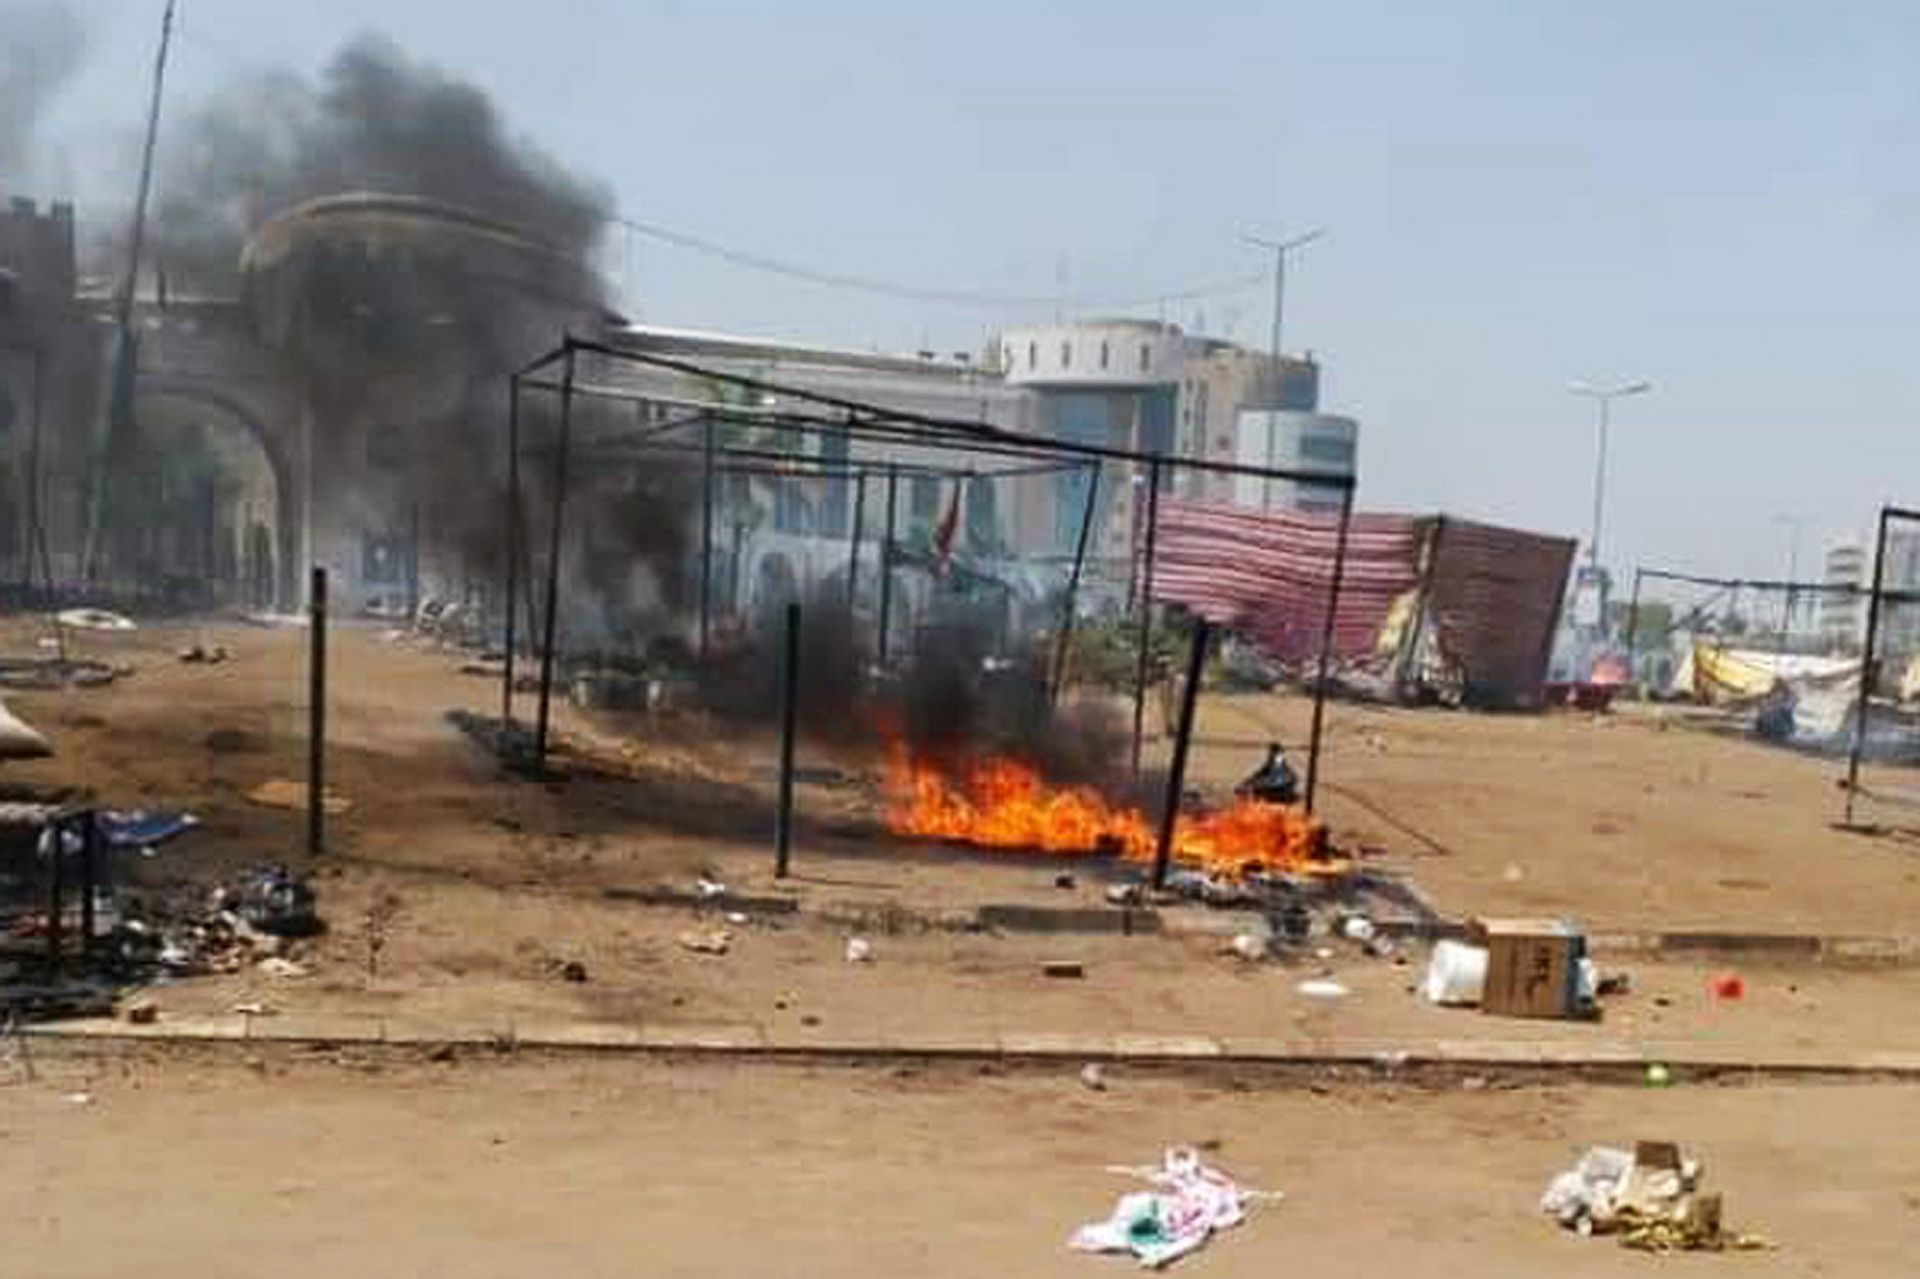 epa07622629 Smoke seen rising inside the sit-in site outside the Sudanese army headquarters, few hours  after news of an early morning clearing by security forces from various media reports, in Khartoum, Sudan, 03 June 2019. According to media reports 13 protesters were killed and several others injured in clashes between the Sudanese protesters and Sudan's military to break up a sit-in.  In retaliation the opposition called for national civil disobedience to put pressure on the Transitional Military Council (TMC) to hand power over to a civilian administration.  EPA/MARWAN ALI ALTERNATIVE CROP OF epa07622335